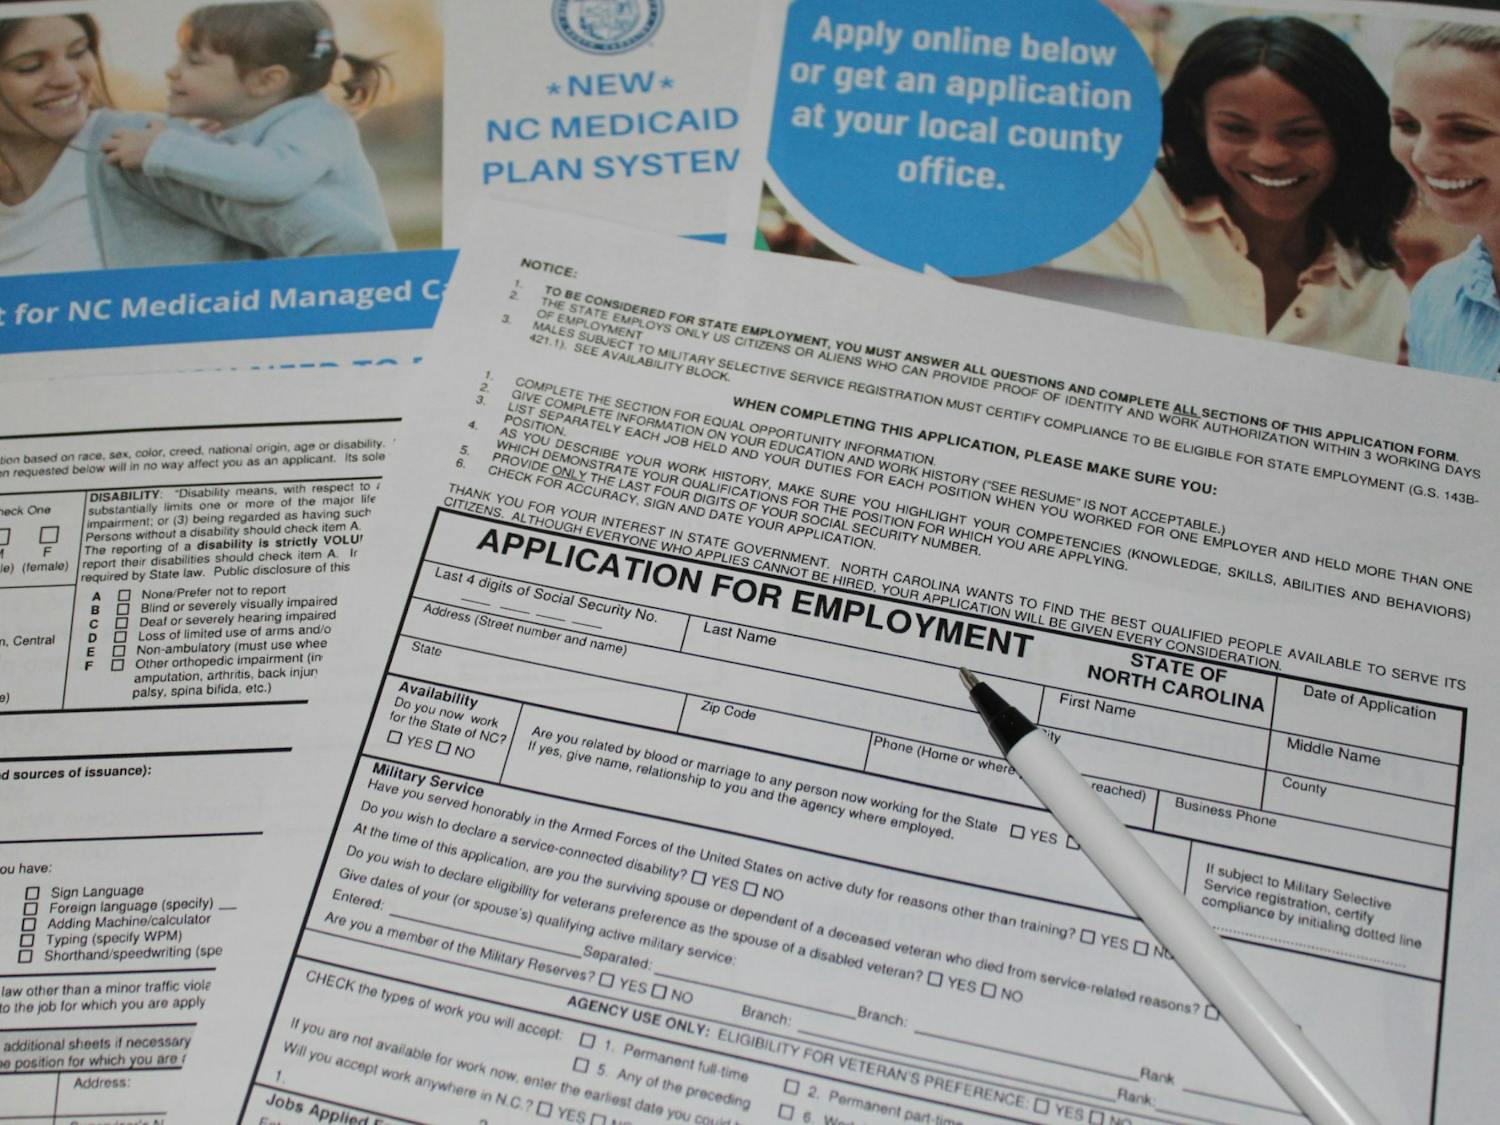 DTH Photo Illustration. NC Medicaid Direct Care workers will be receiving bonuses for their work during the pandemic.